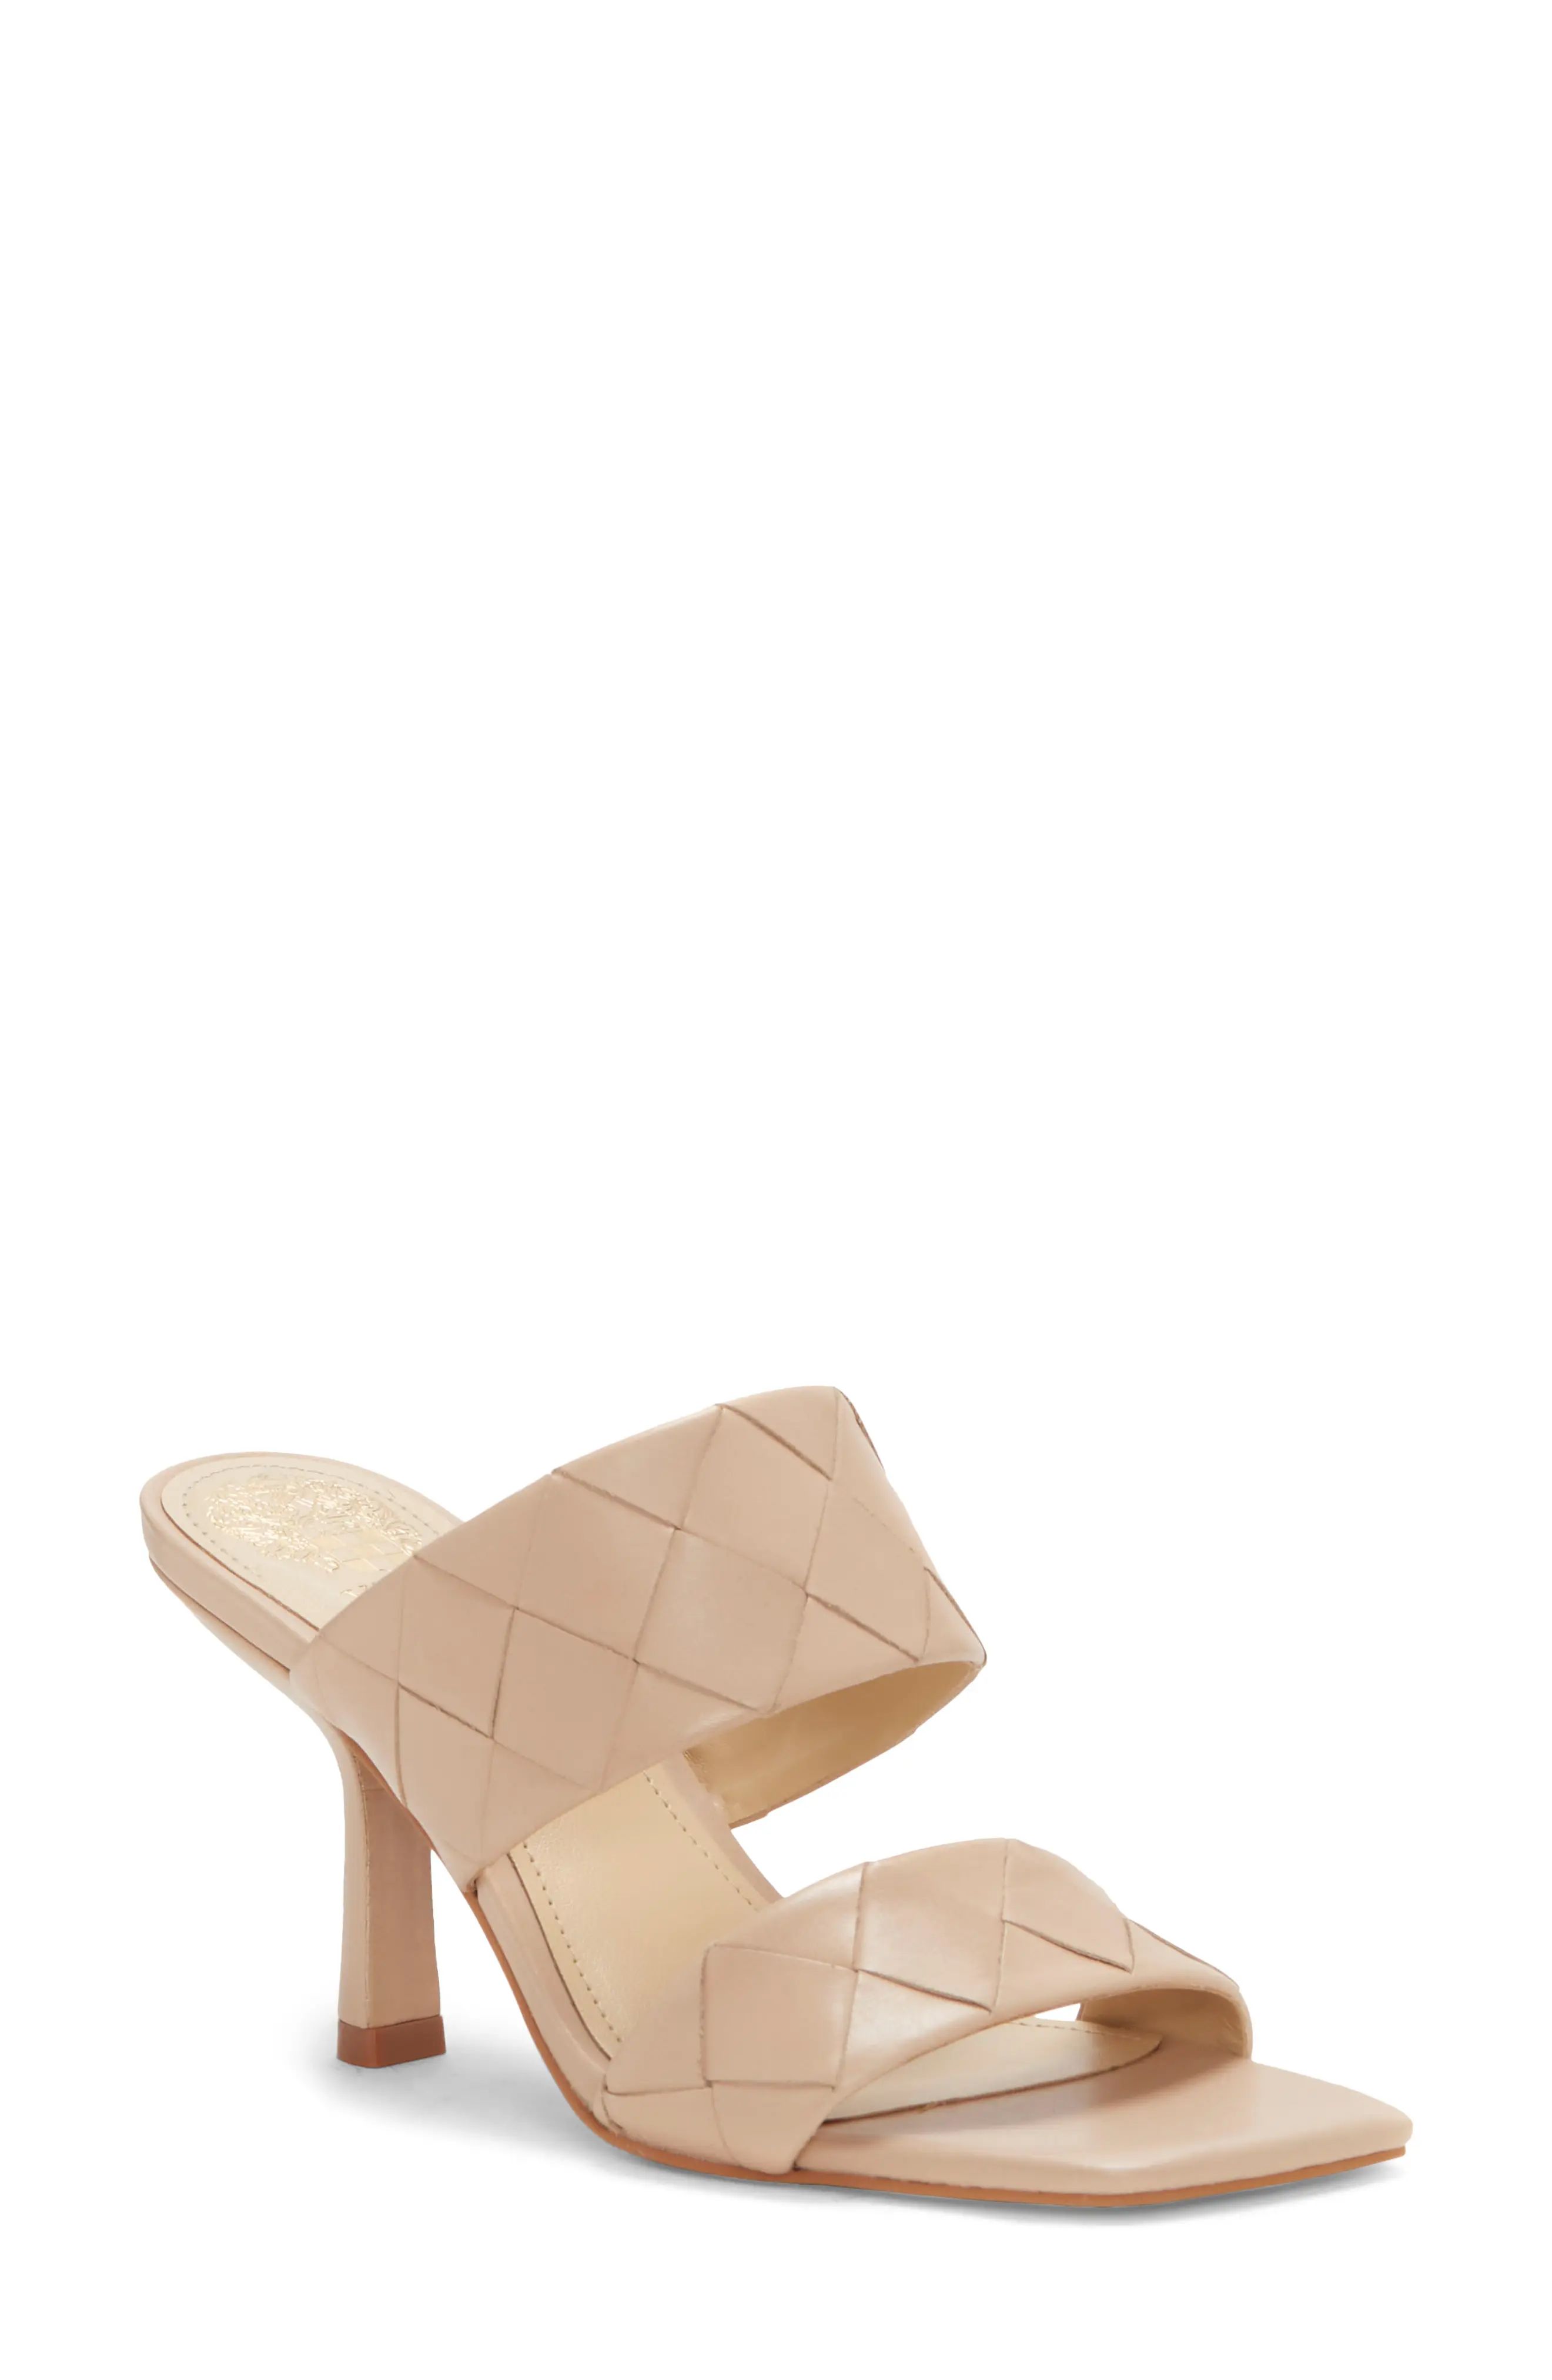 Vince Camuto Candialia Sandal in Nude Nappa at Nordstrom, Size 11 | Nordstrom